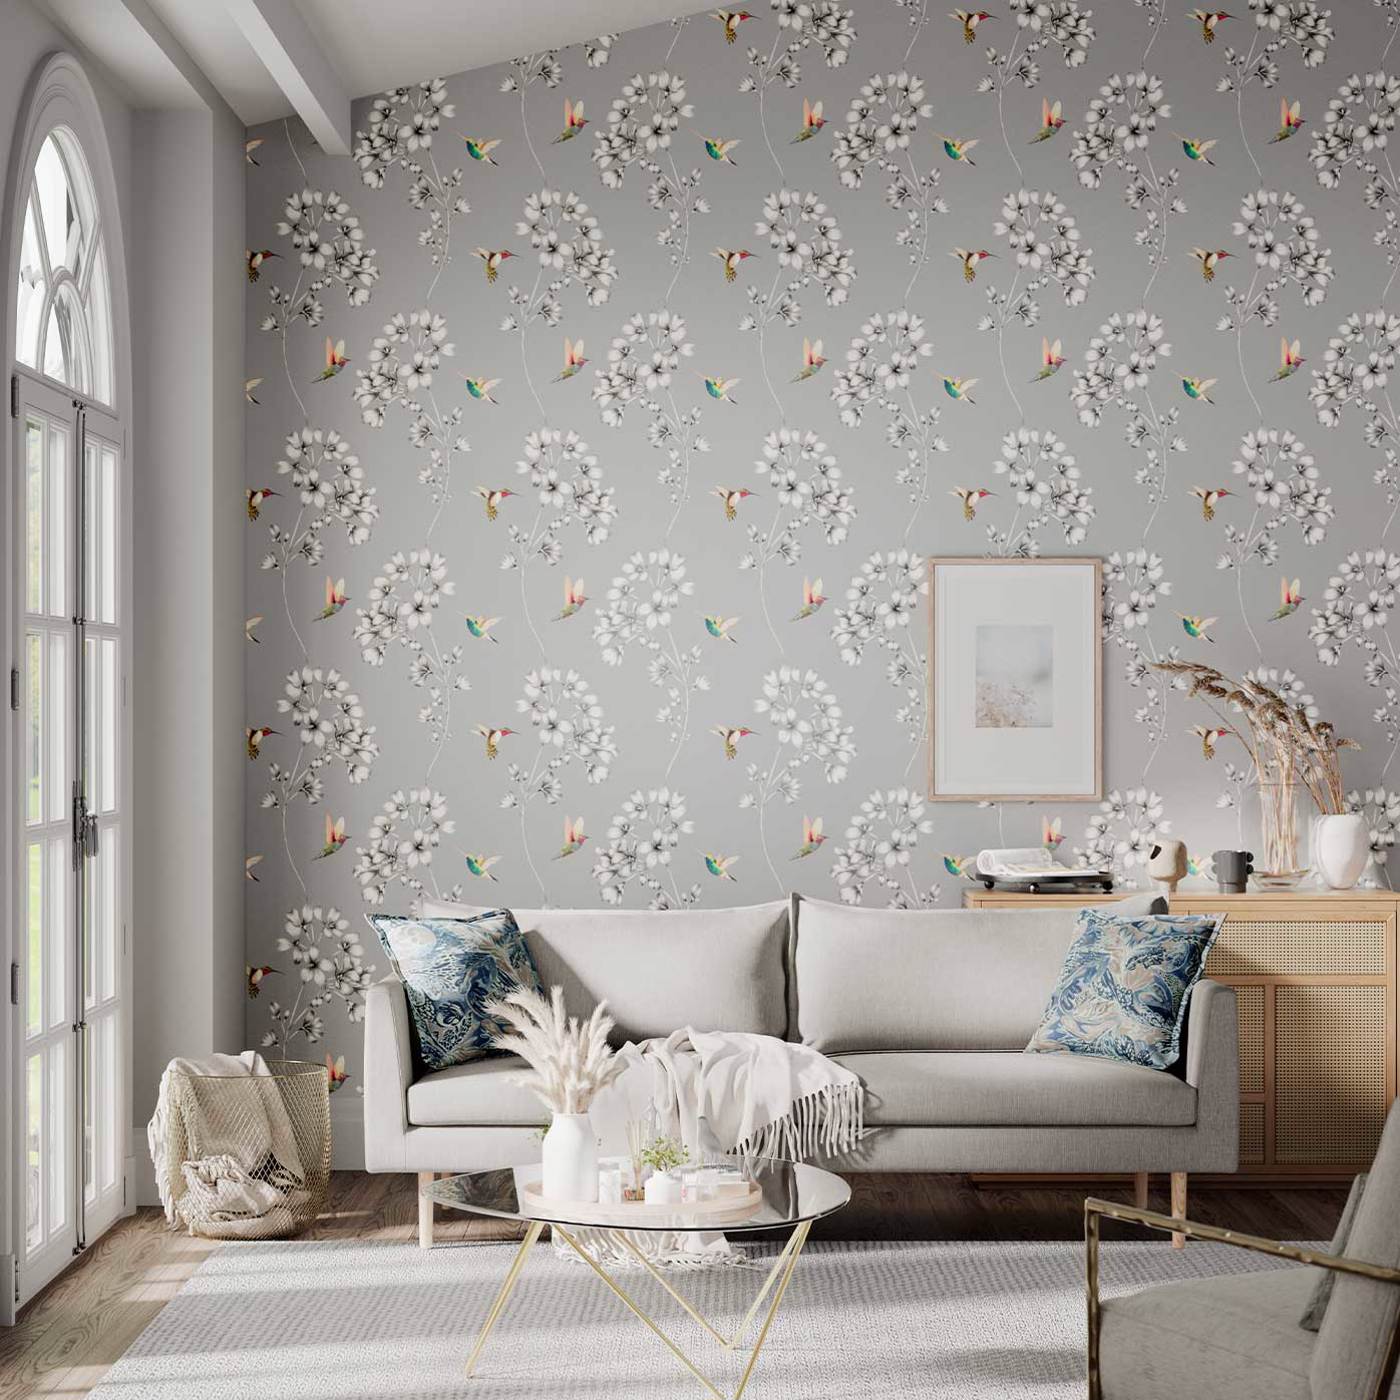 What are the benefits of wallpaper